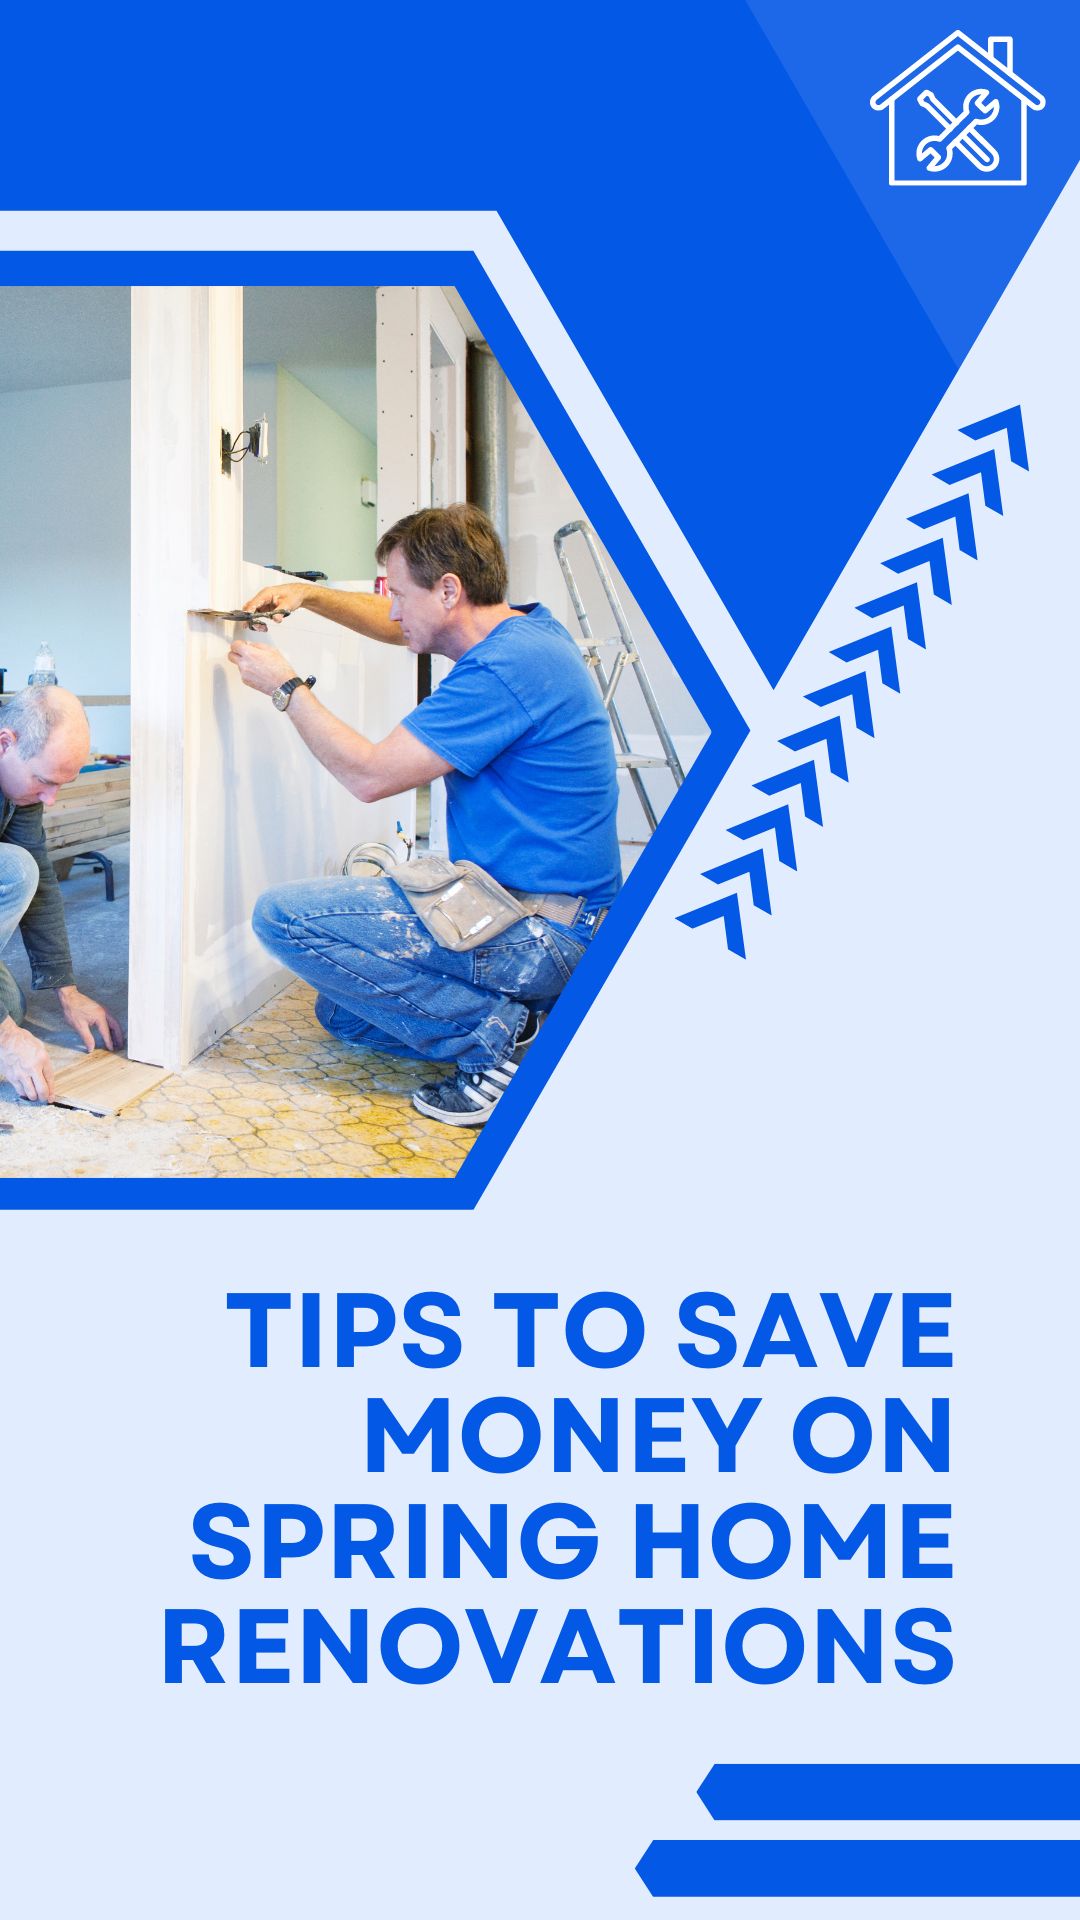 Tips to Save Money on Spring Home Renovations